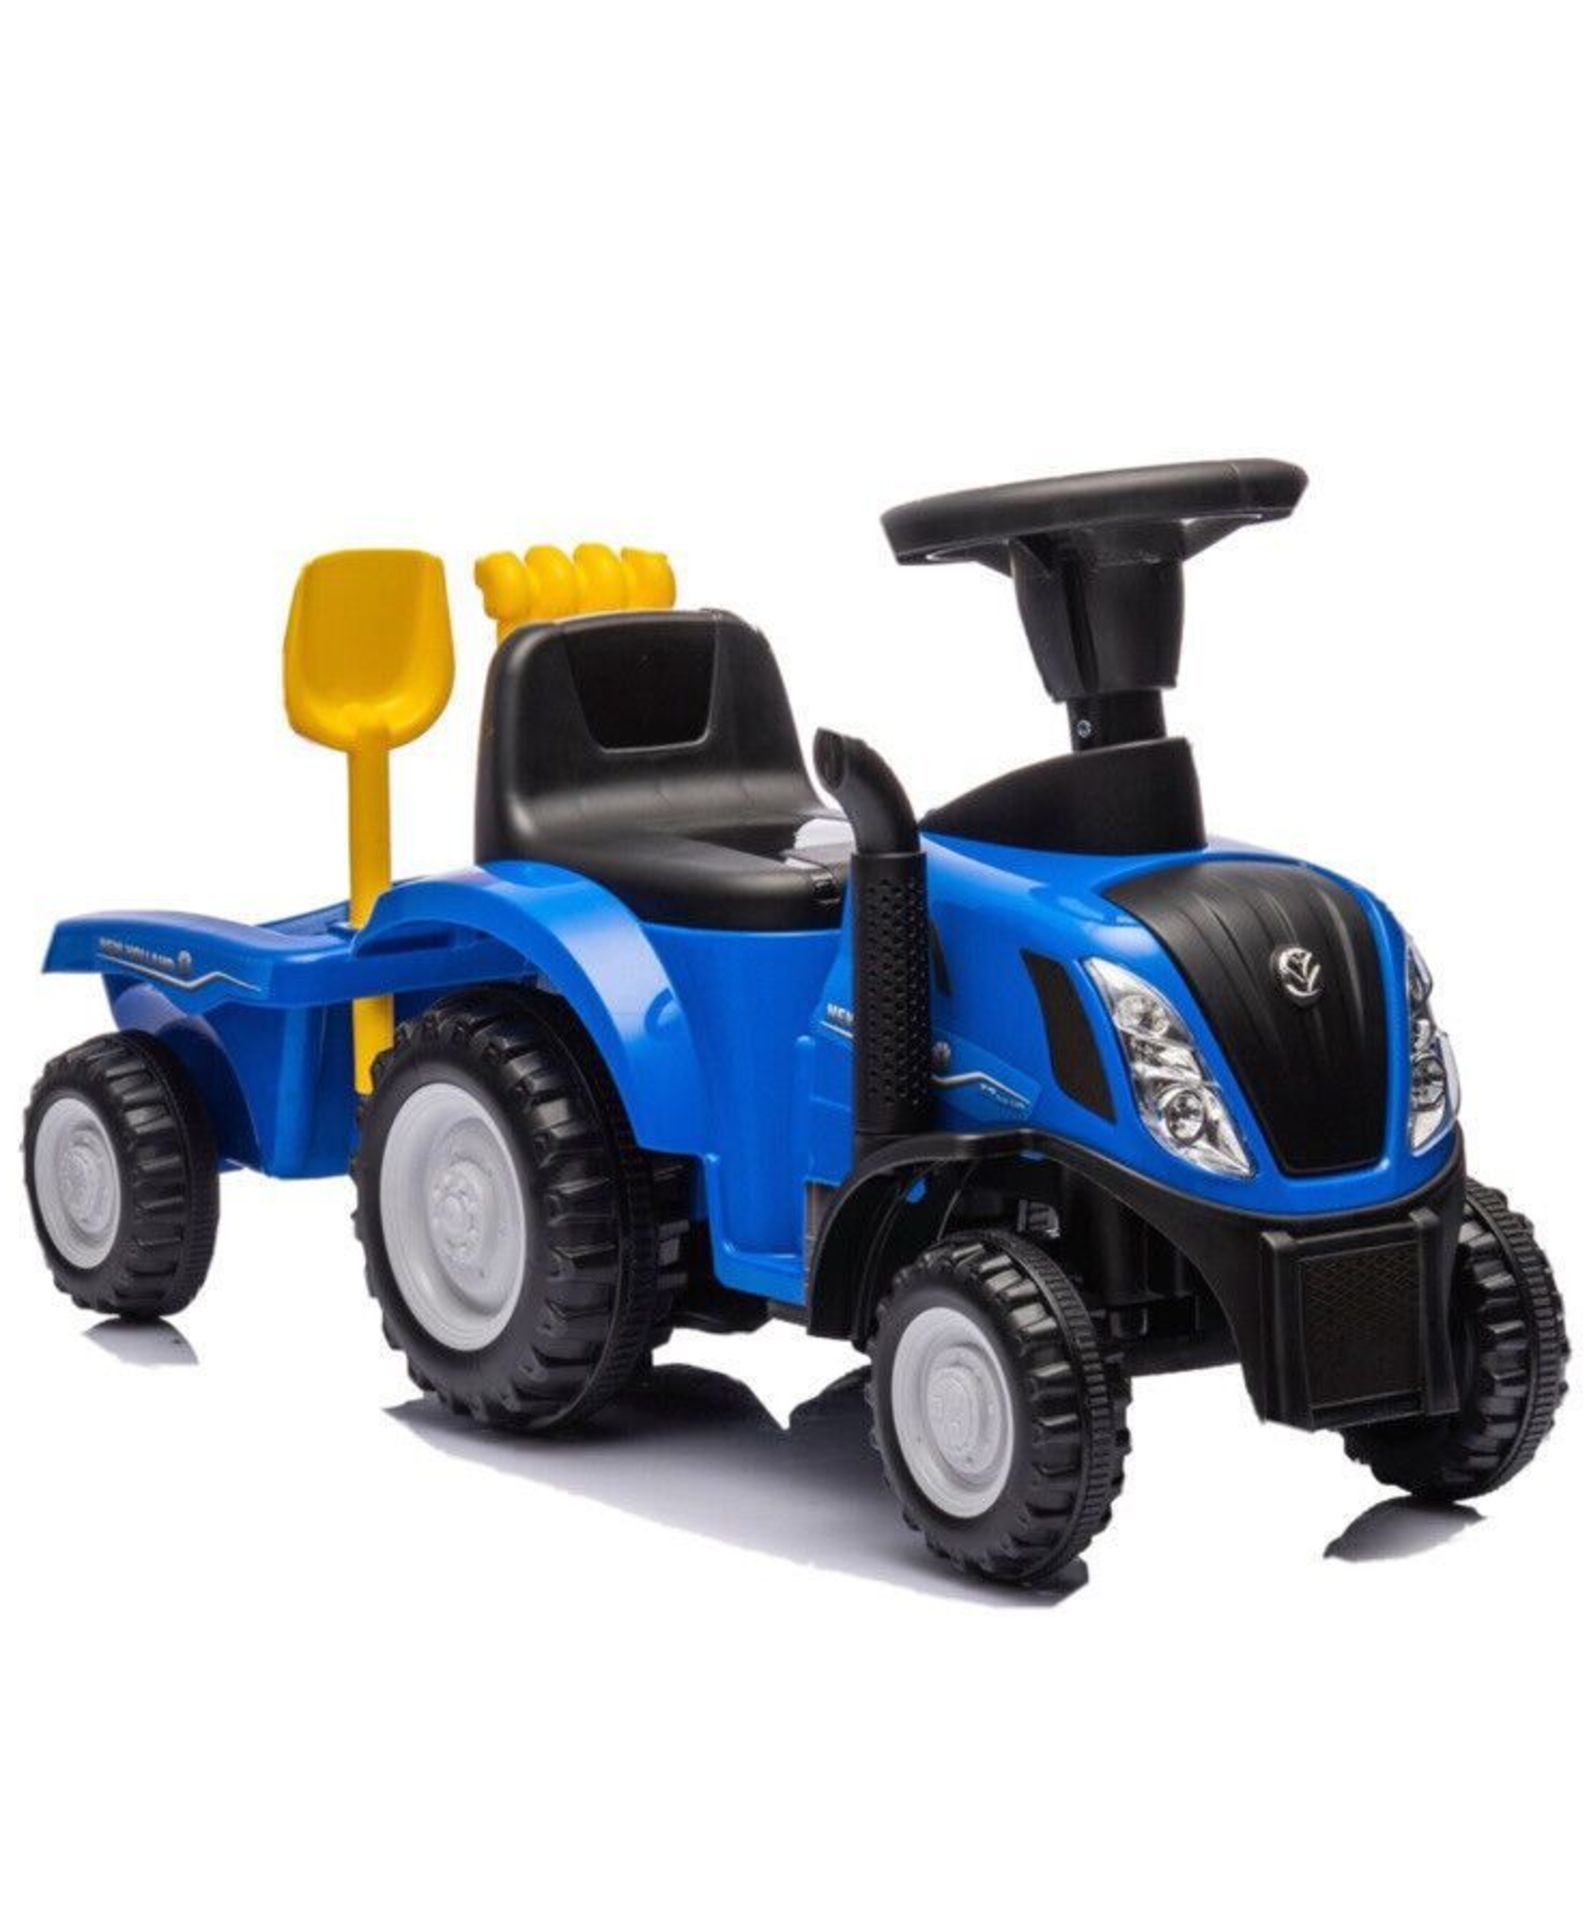 New Holland T7 Tractor Ride On with Trailer Kids Outdoor Toy. - R14.1. - Image 2 of 2